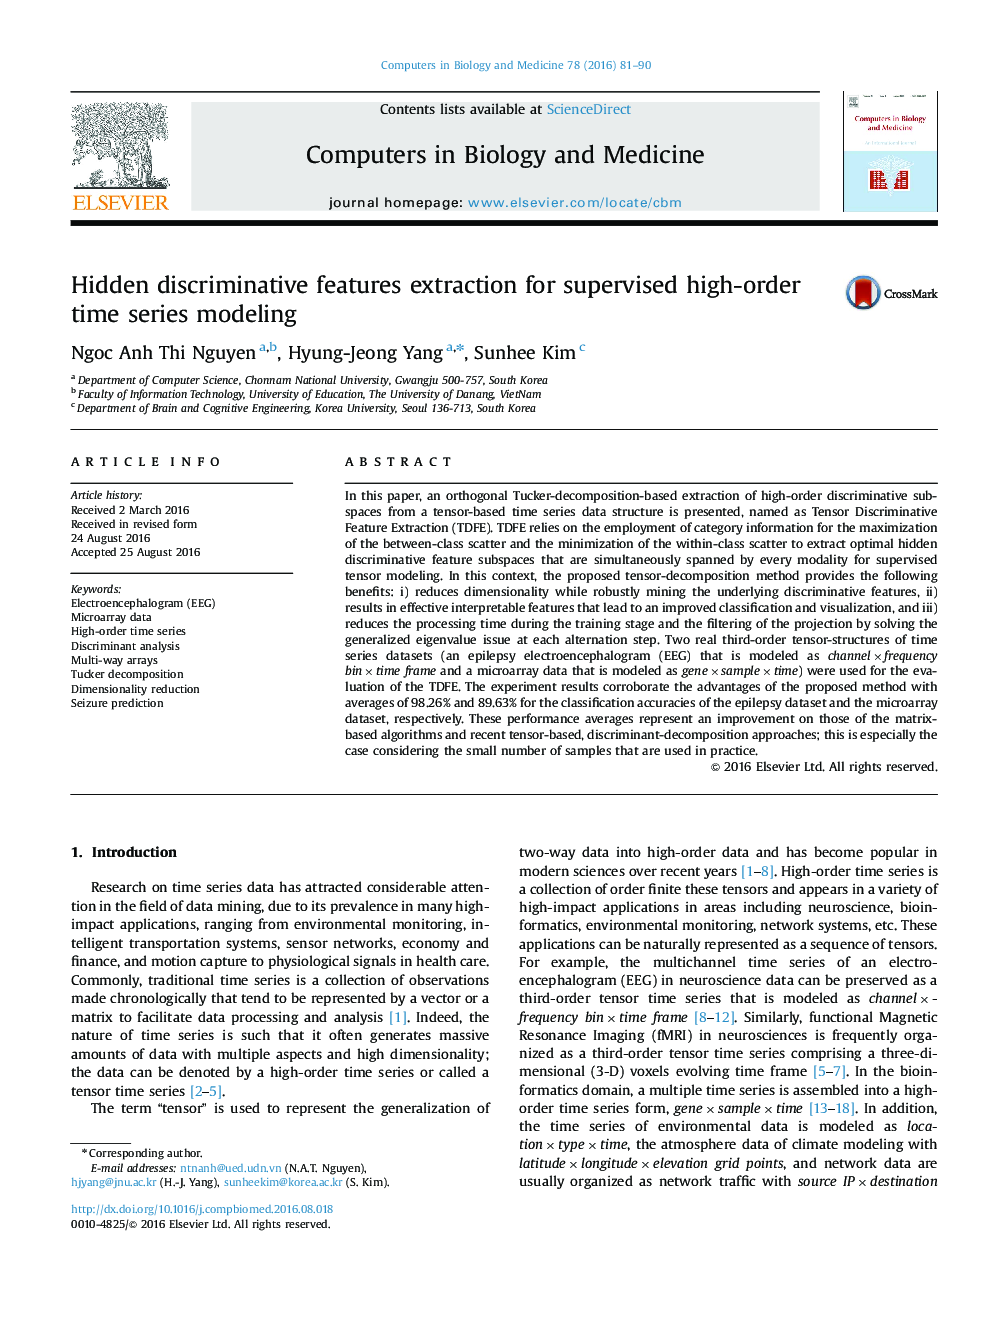 Hidden discriminative features extraction for supervised high-order time series modeling